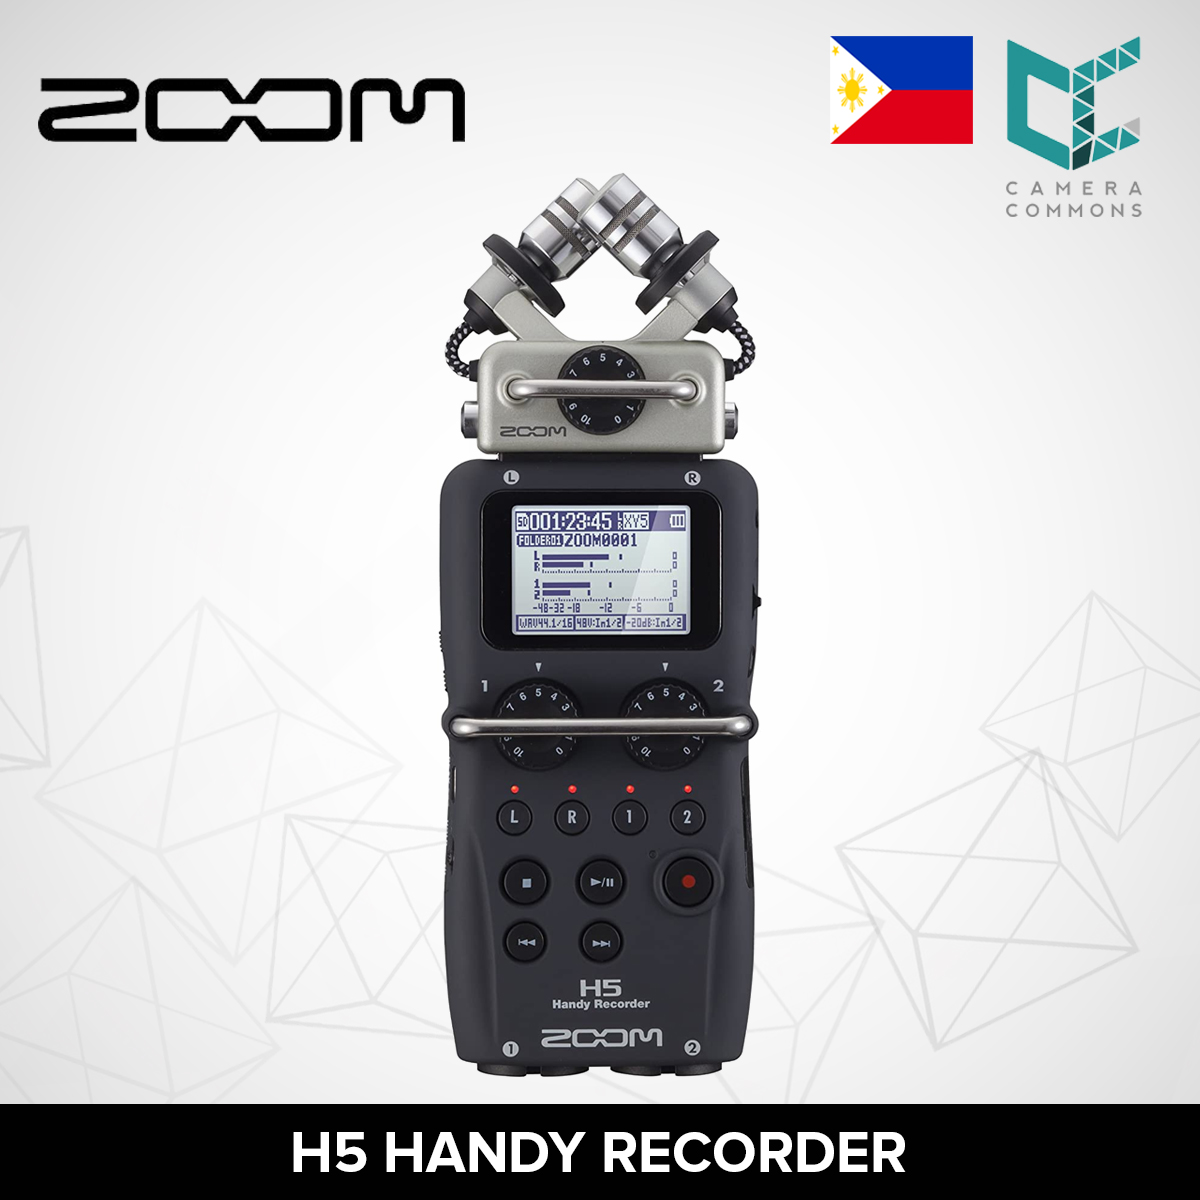 Zoom H5 4-Track Portable Recorder for Audio for Video, Music, and Podcasting,  Stereo Microphones, 2 XLR/TRS Inputs, USB Audio Interface, Battery Powered